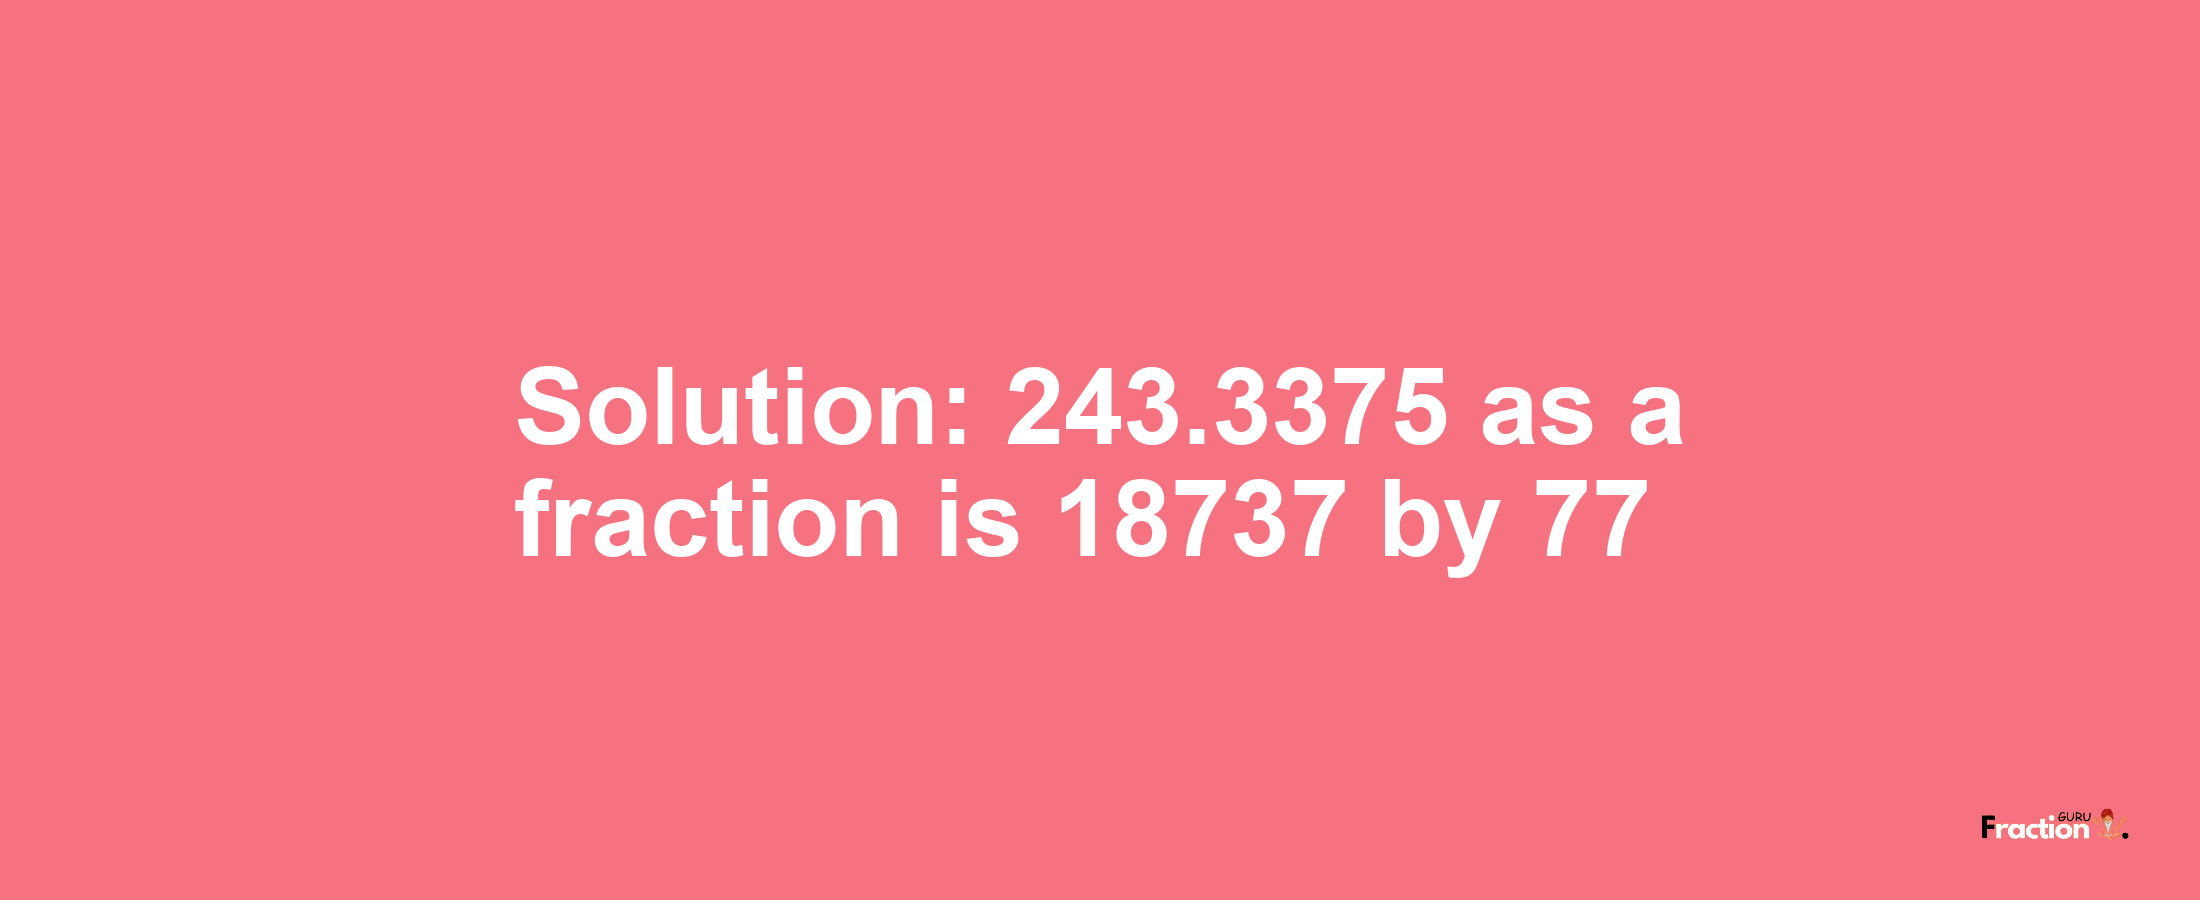 Solution:243.3375 as a fraction is 18737/77